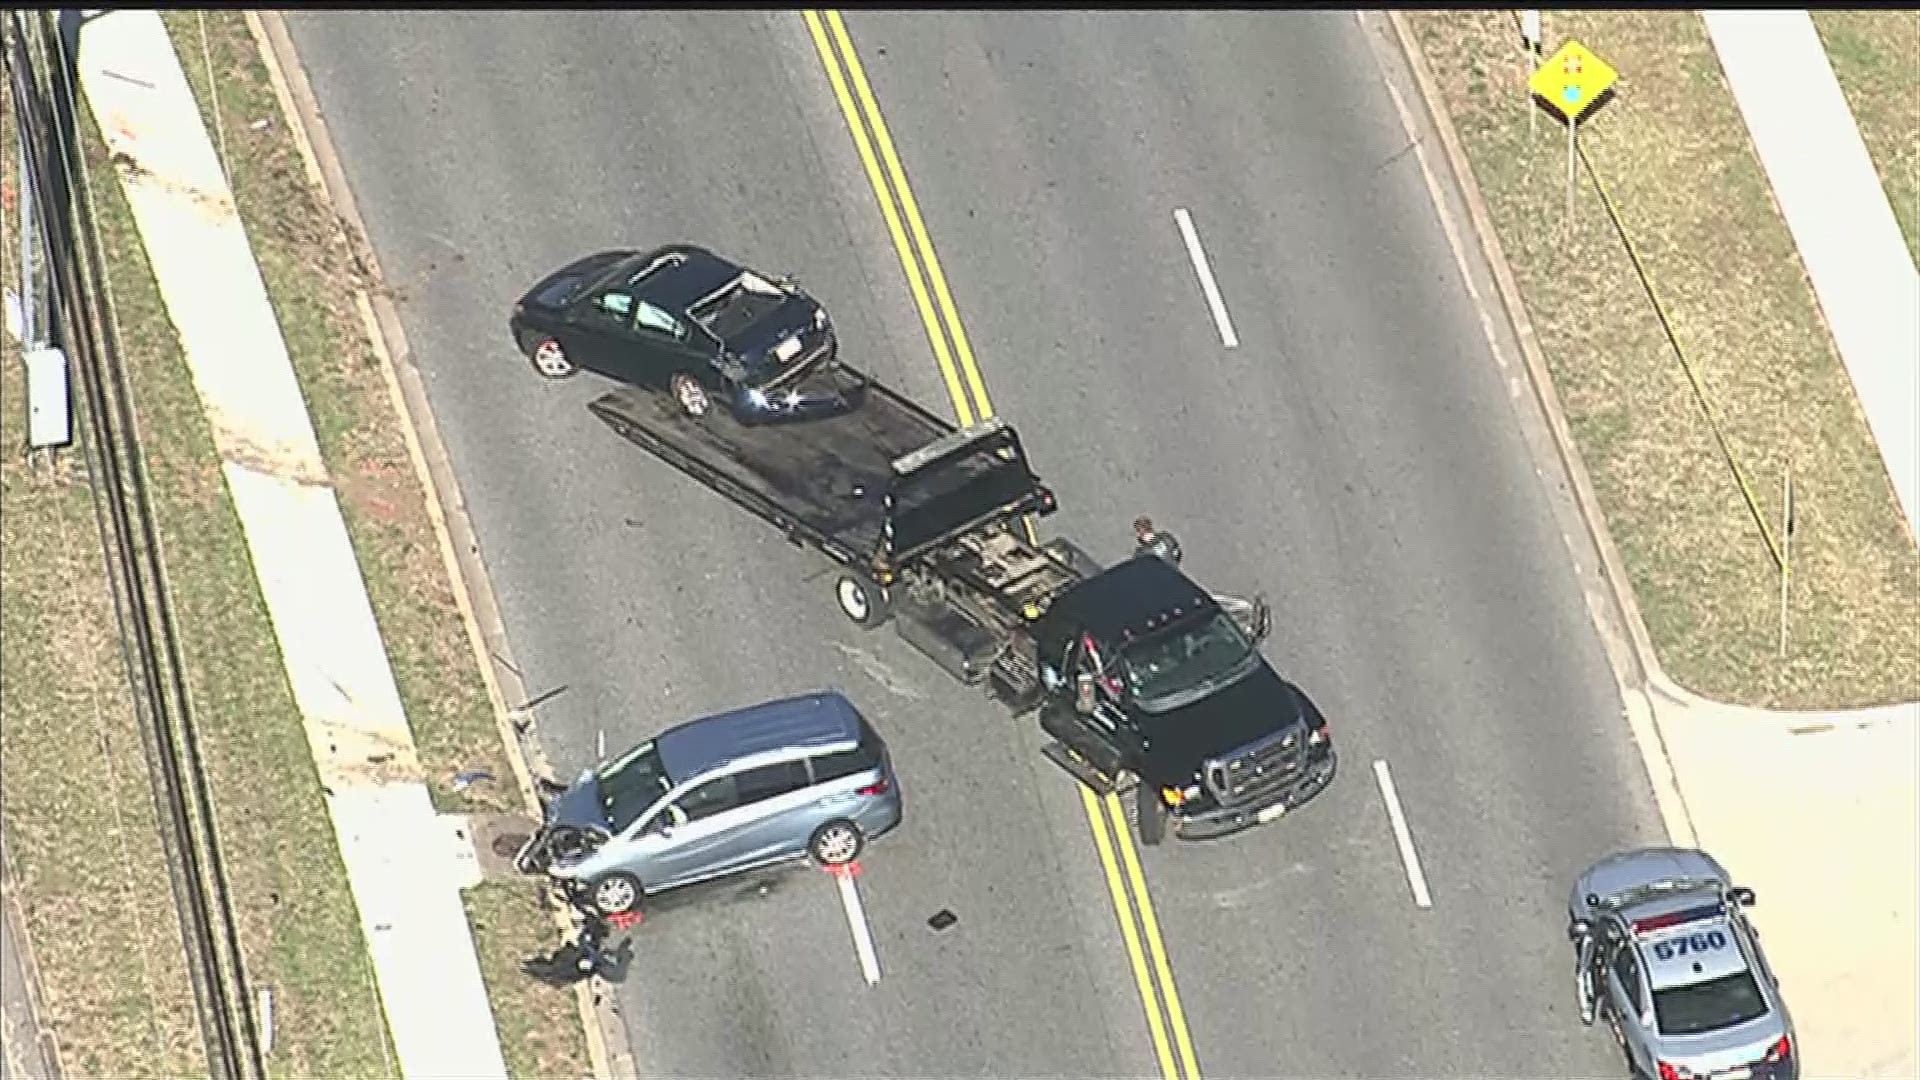 Five DuVal High School students were involved in a serious vehicle crash in Prince George's County, authorities say.